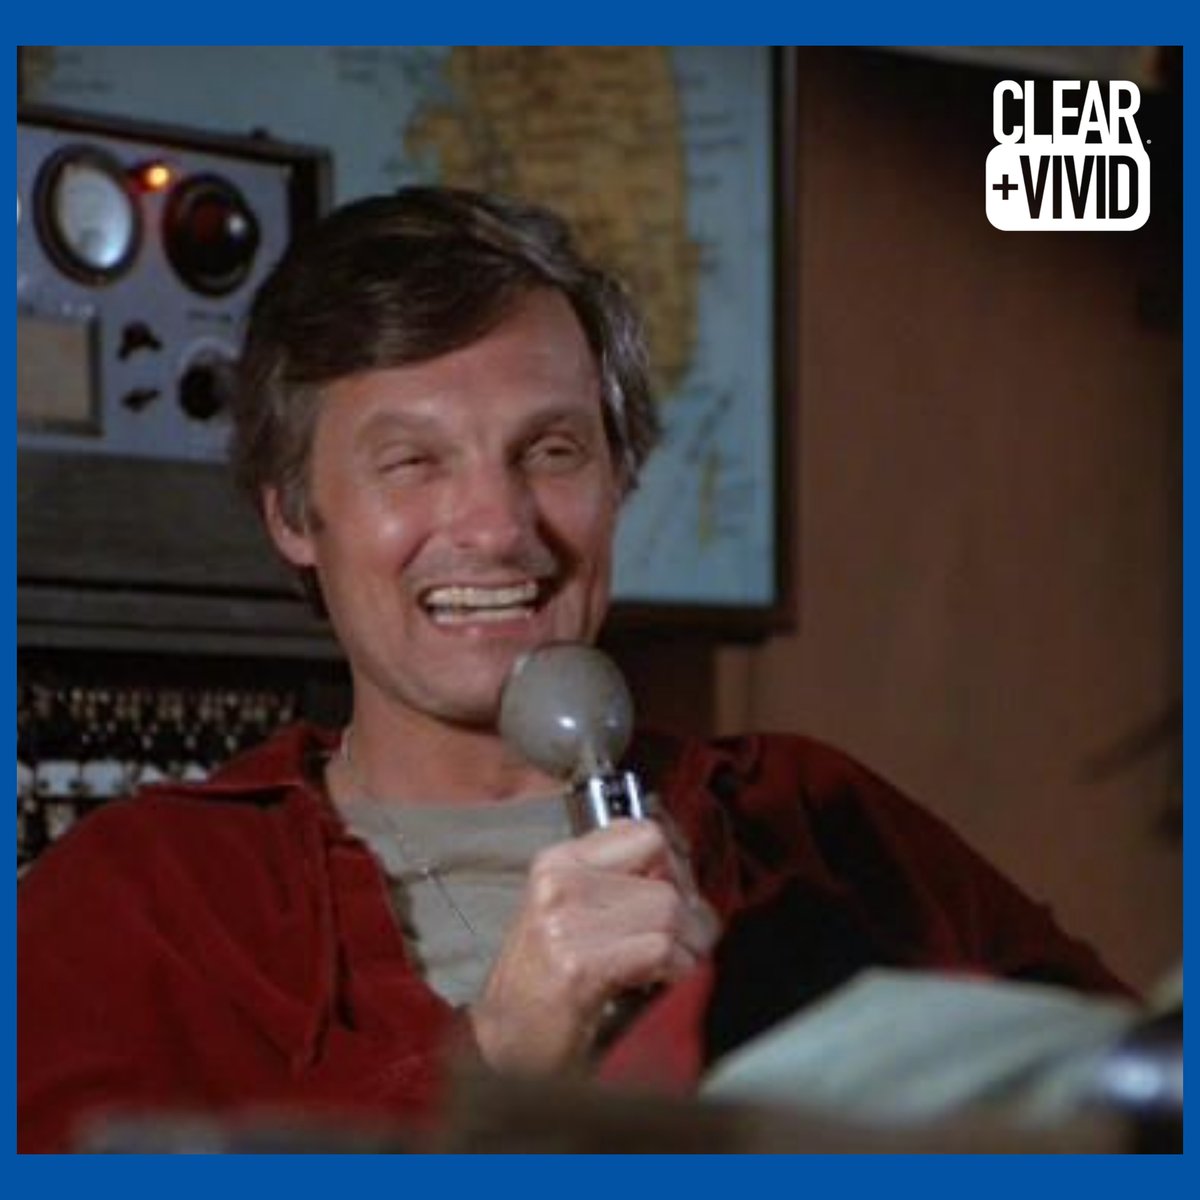 You made it, it's Friday! Are you all caught up with Clear+Vivid with @AlanAlda? We're back soon with more connecting & communicating. News about Season 25 is right around the corner! 👉bit.ly/3tR21Gs After production costs, all proceeds of Clear+Vivid go to @AldaCenter